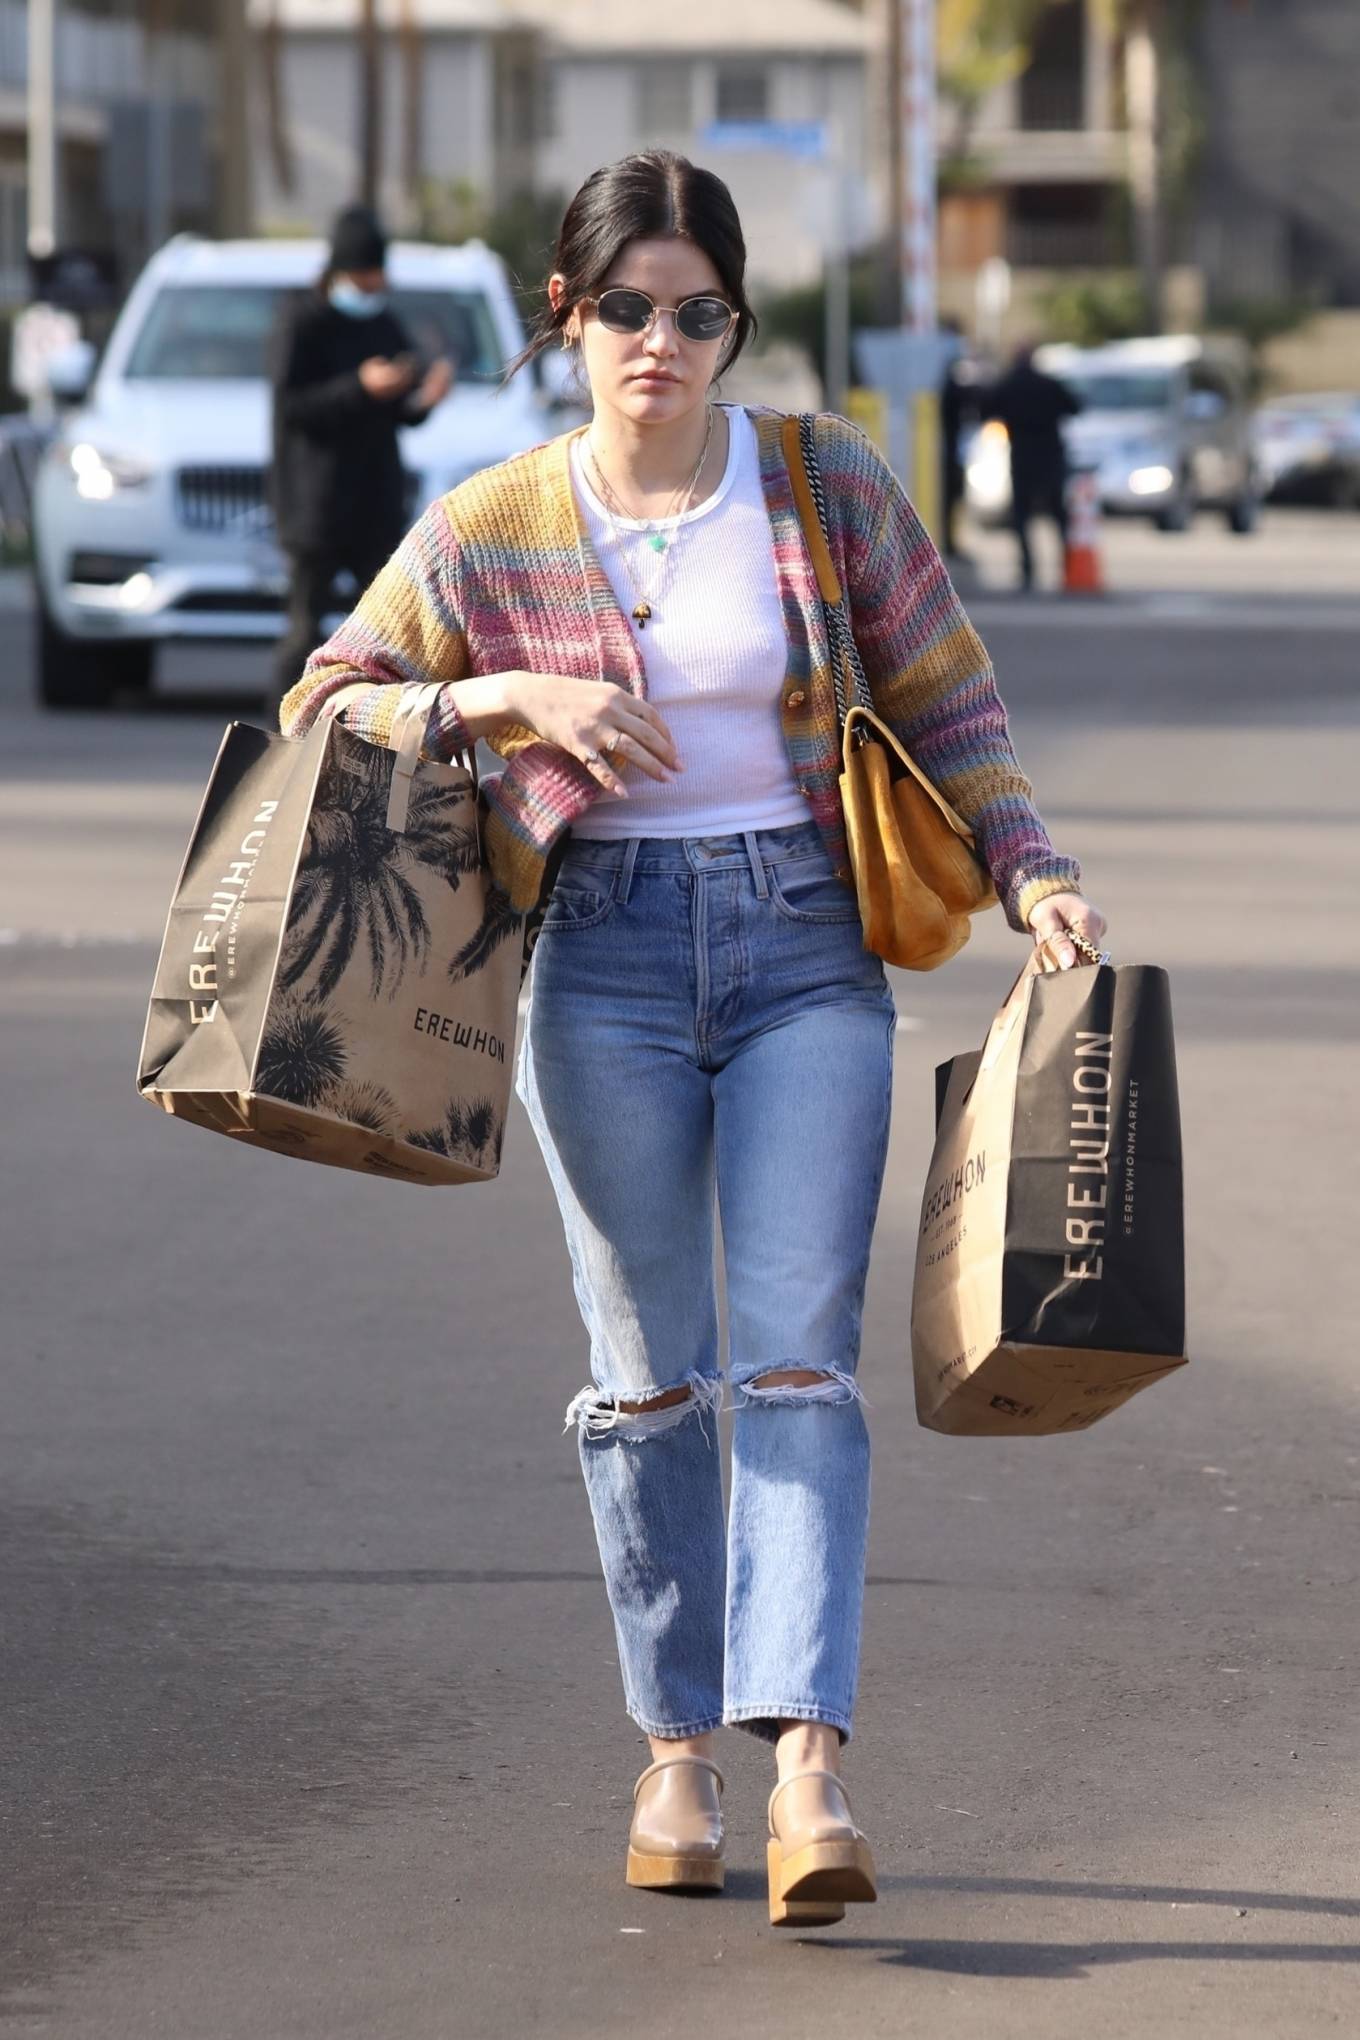 Lucy Hale - Grocery shopping at Erewhon Organic Grocers in Los Angeles